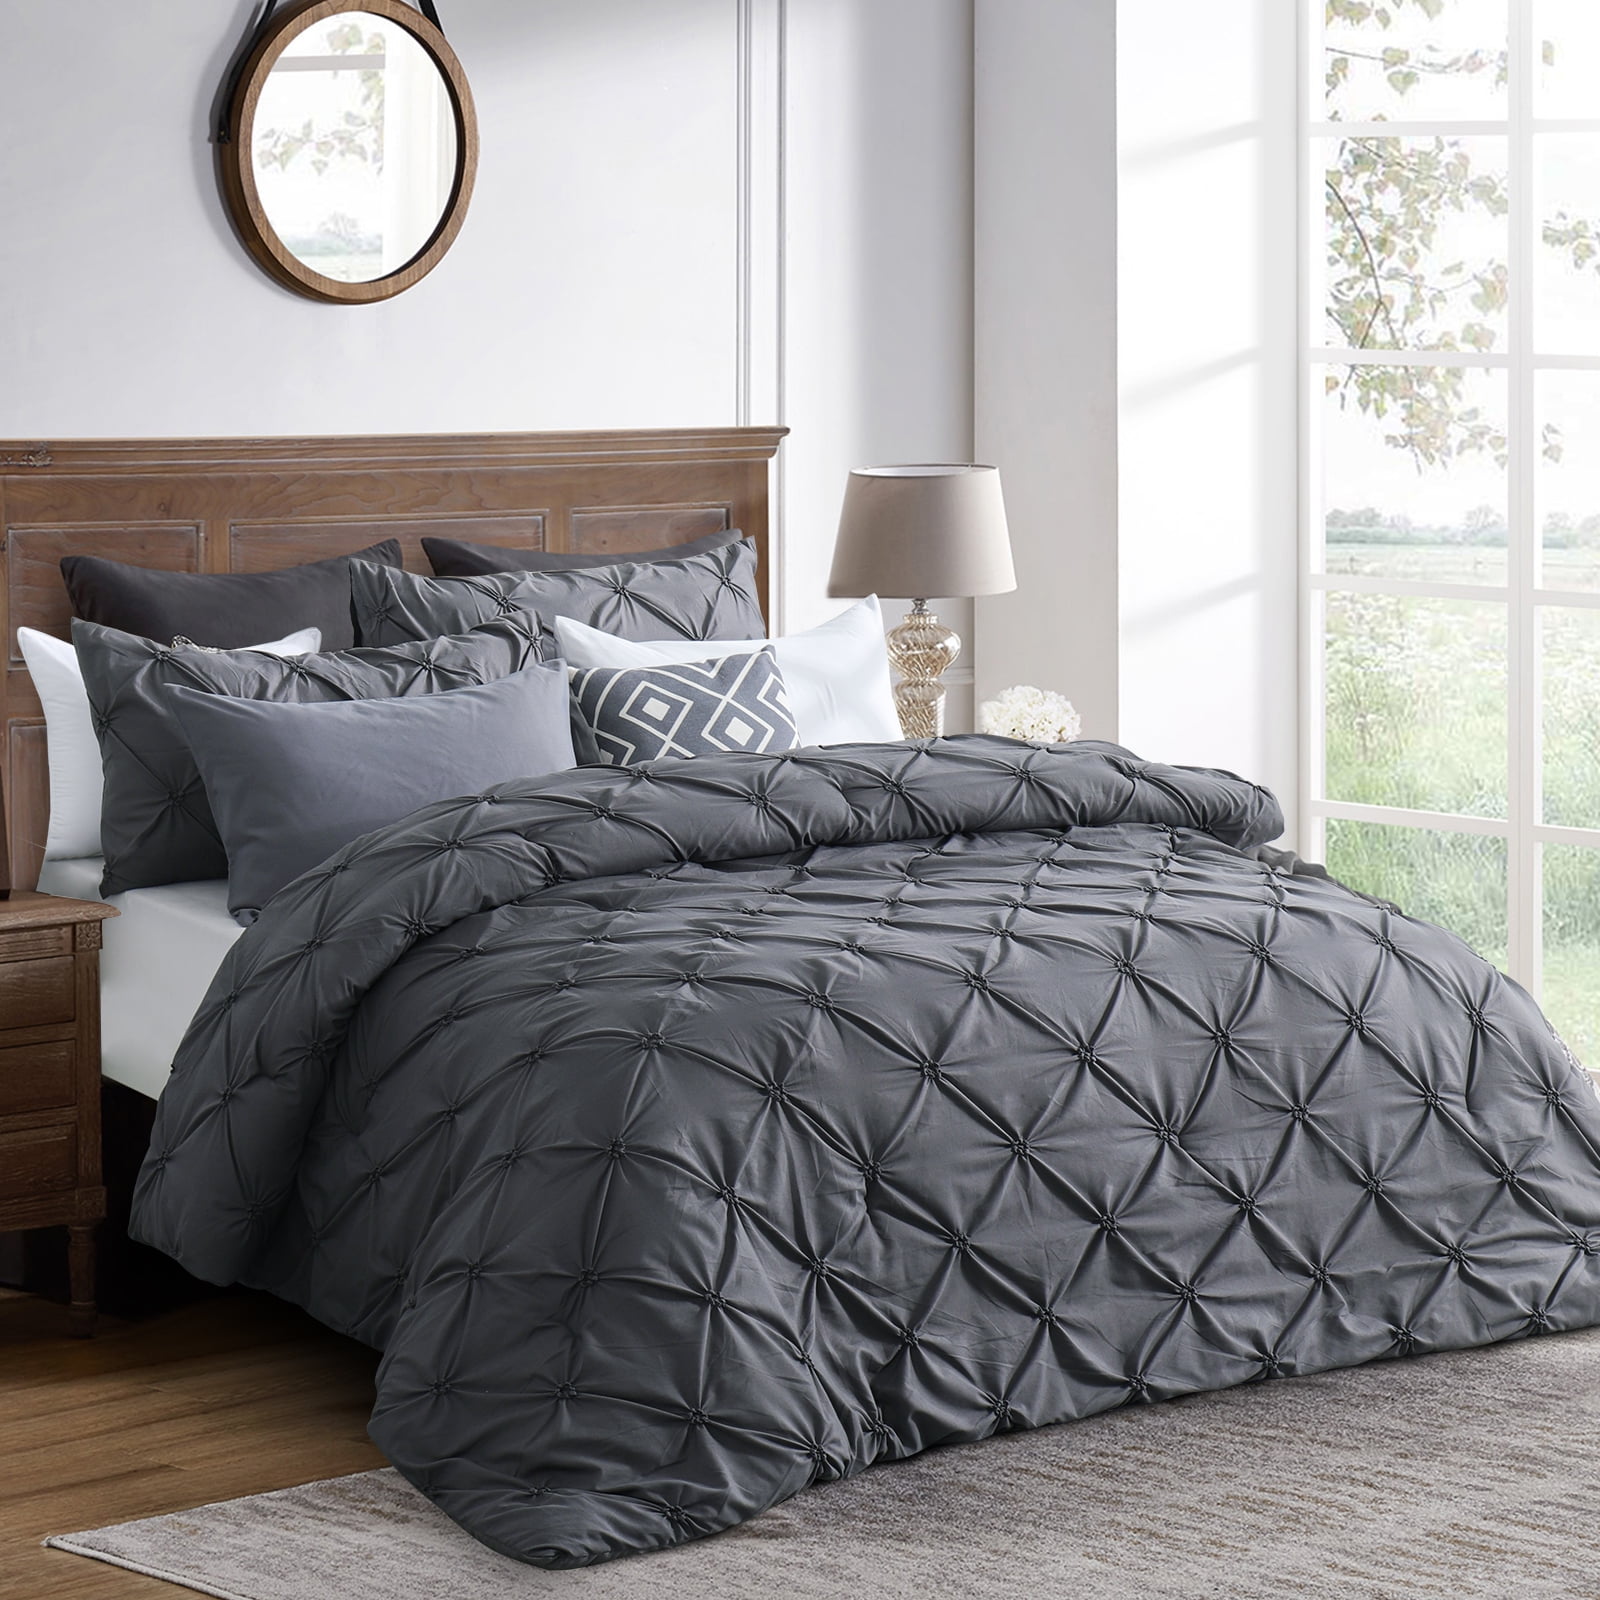 RUIKASI Dark Gray King Comforter Set - Soft and Fluffy Bedding 3 Pieces  Set, Pintuck Dark Gray Bedding Sets King Size, Bed Set with Comforter,  Pillowcases 